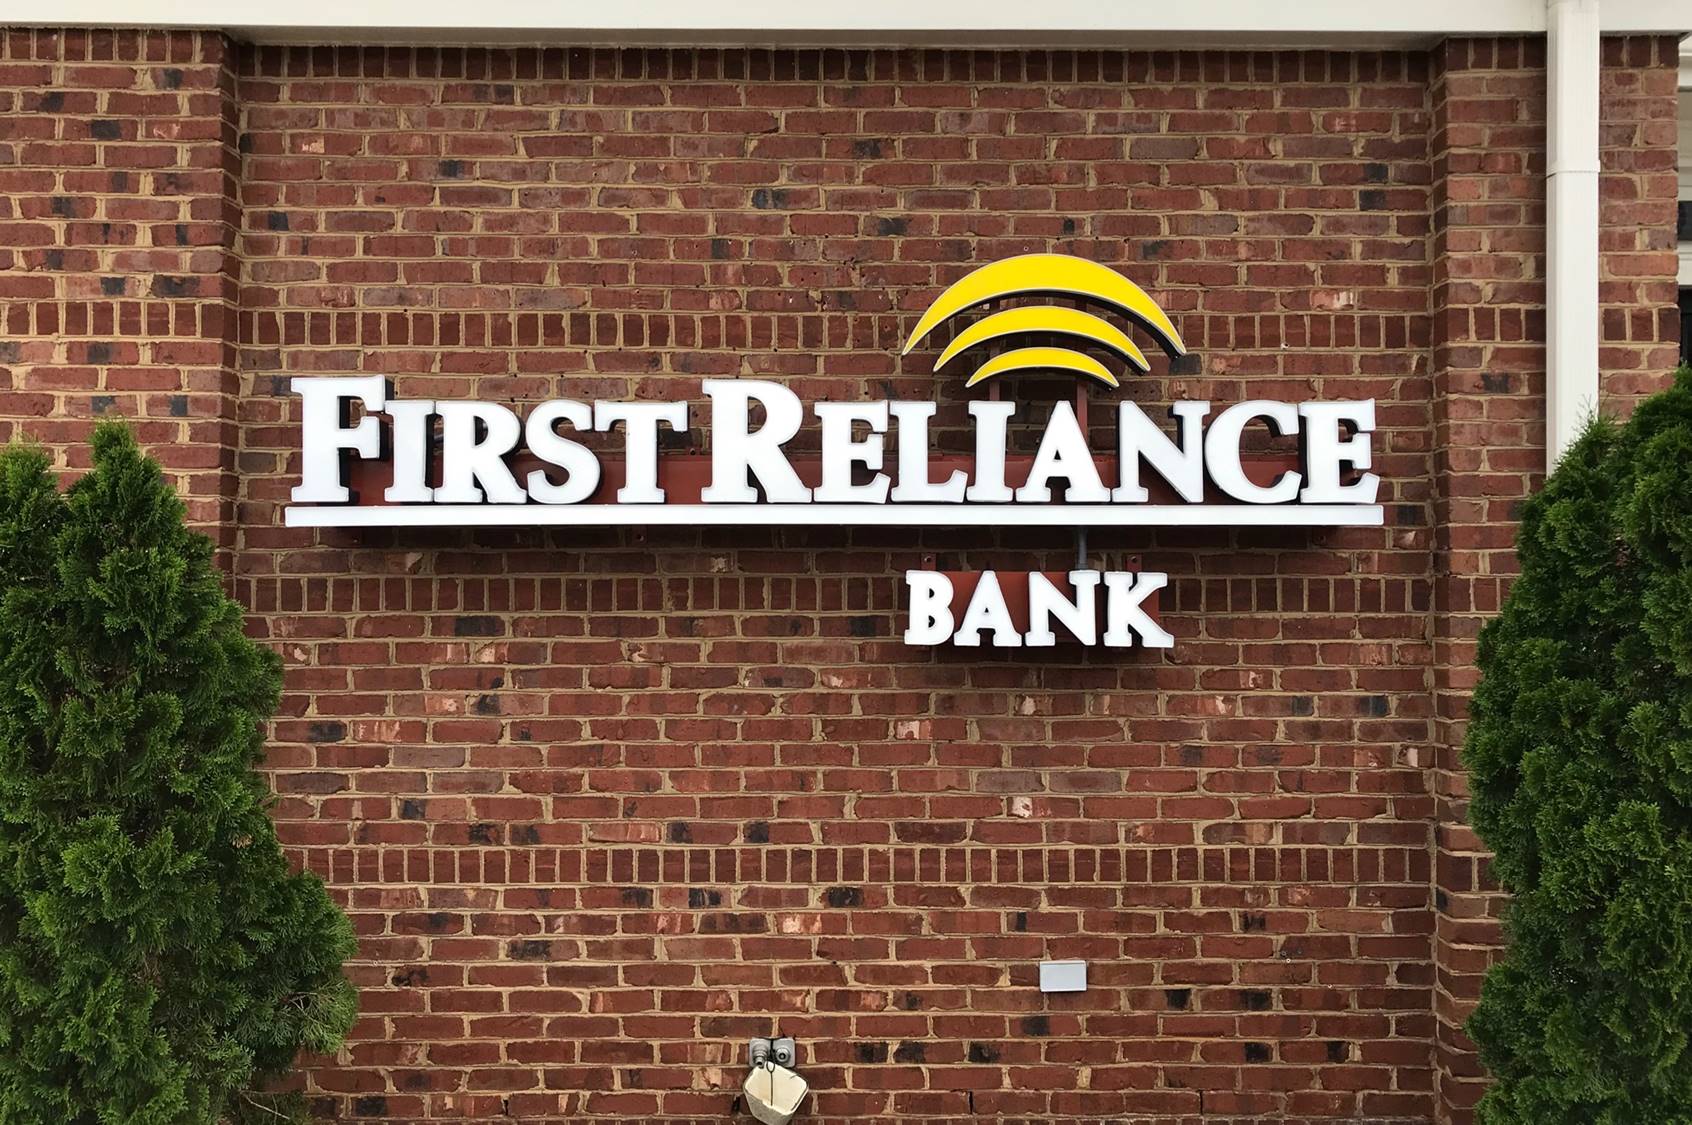 First Reliance Bank